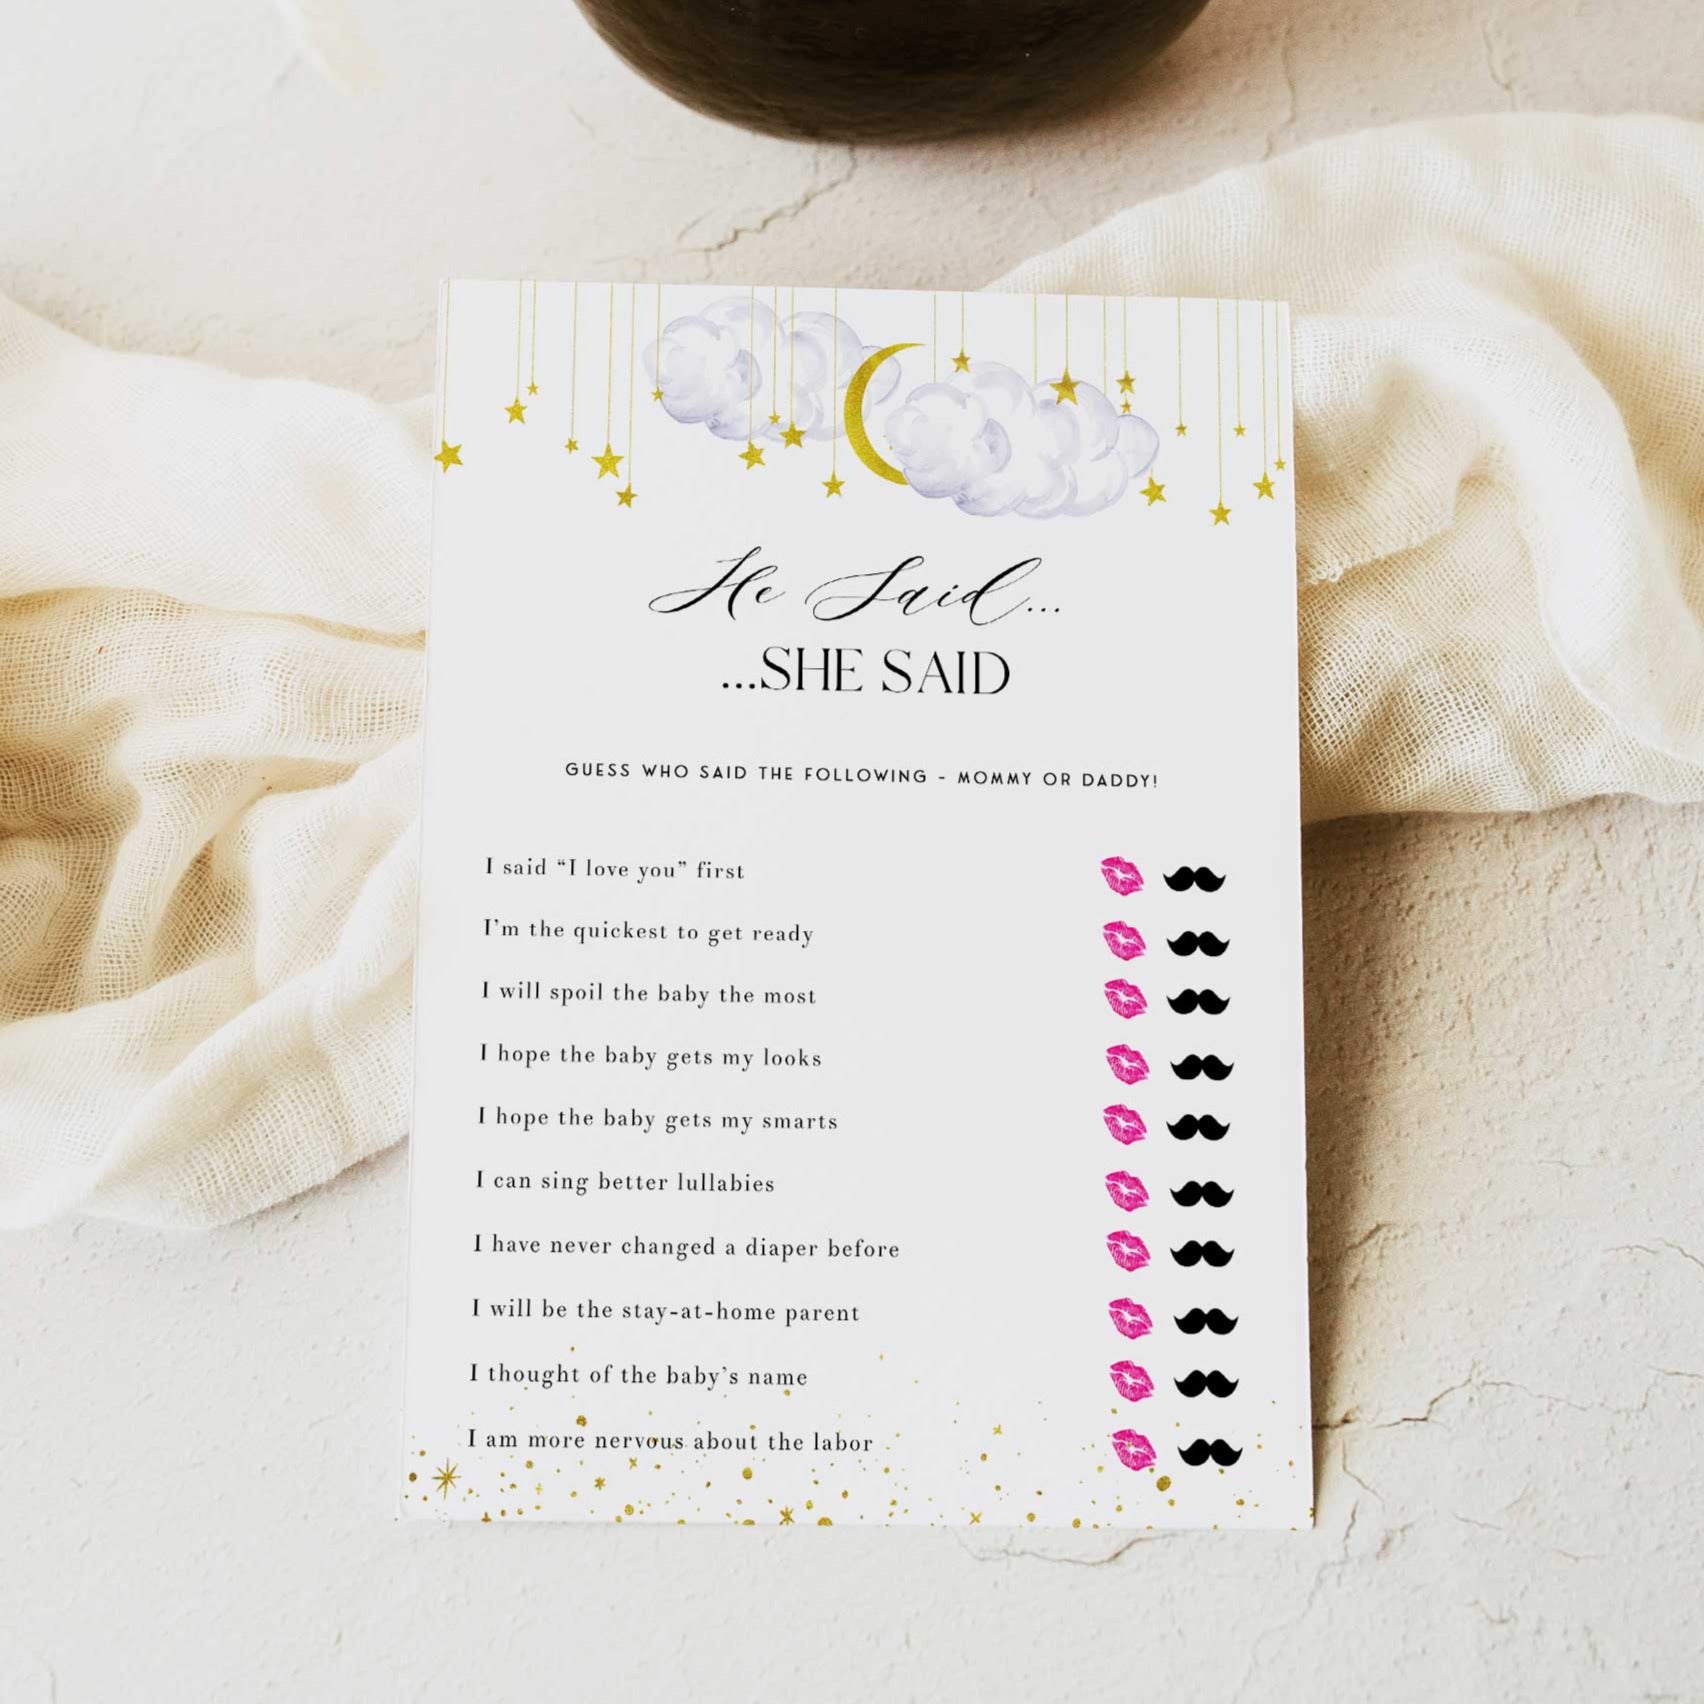 Fully editable and printable baby shower he said she said game with a little star design. Perfect for a Twinkle Little Star baby shower themed party